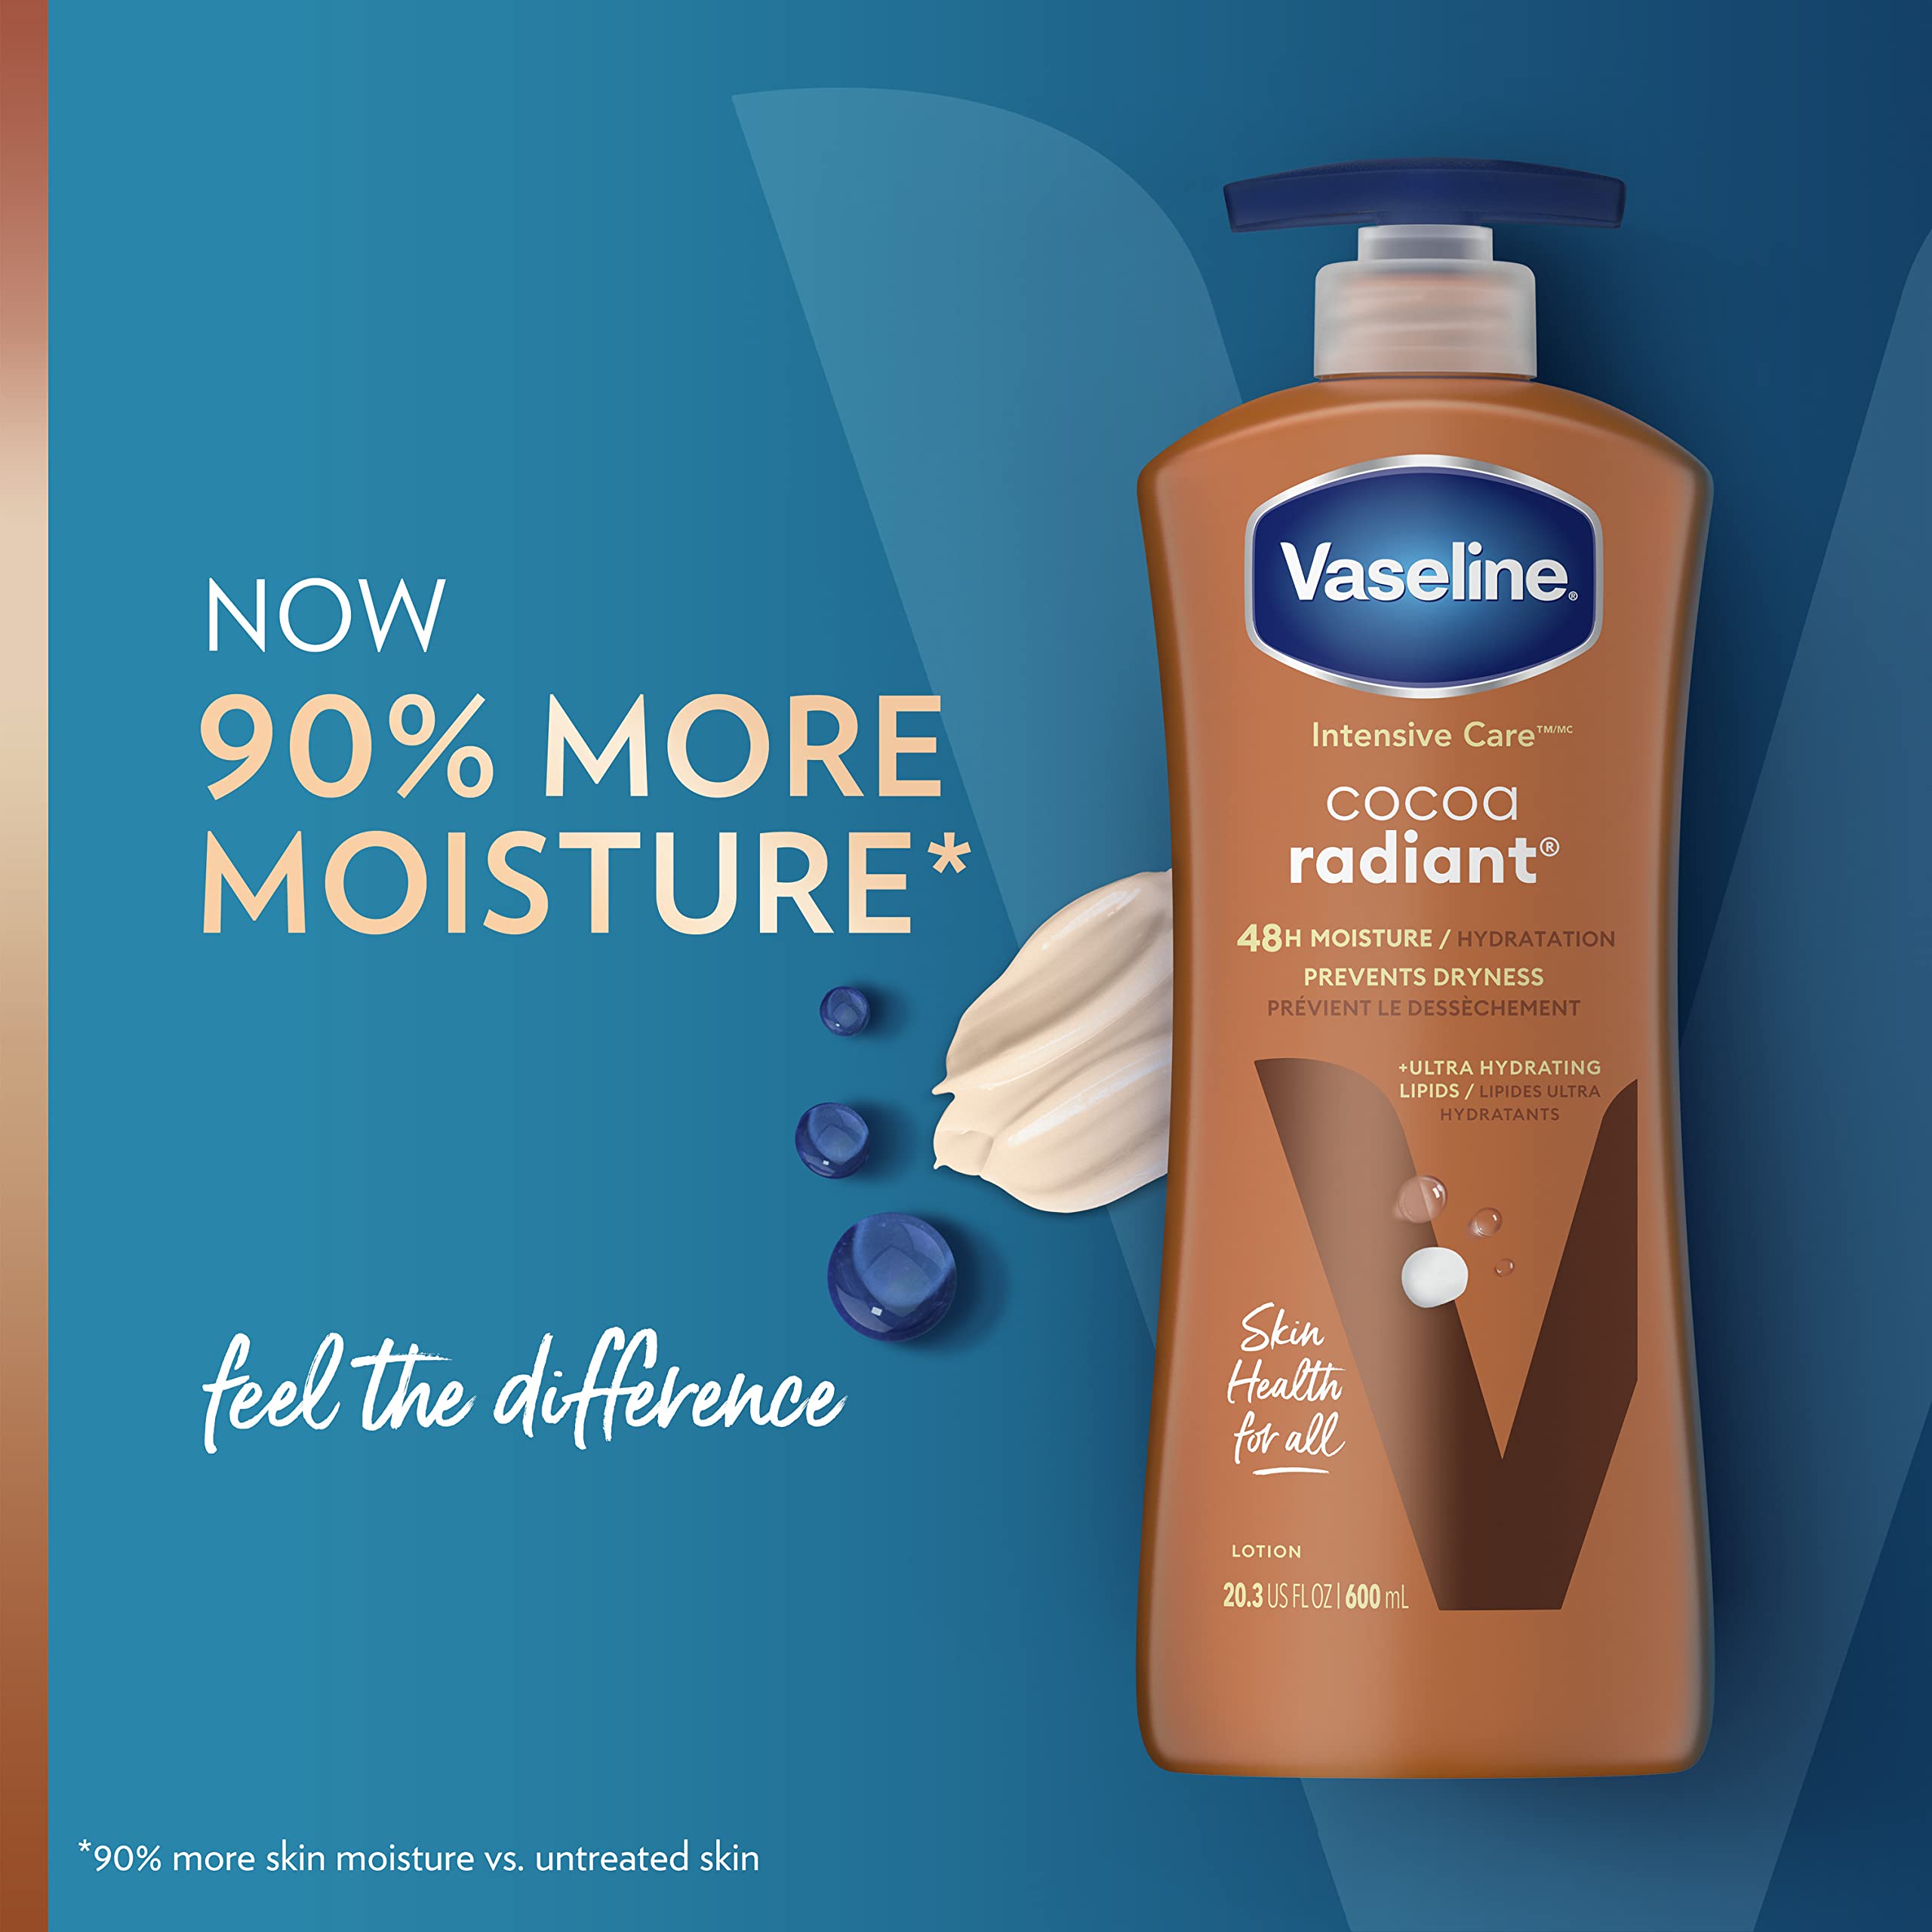 Vaseline Intensive Care Body Lotion Cocoa Radiant 4 ct for Dry Skin with Ultra-Hydrating Lipids and Pure Cocoa Butter for a Long-Lasting, Radiant Glow 20.3 oz